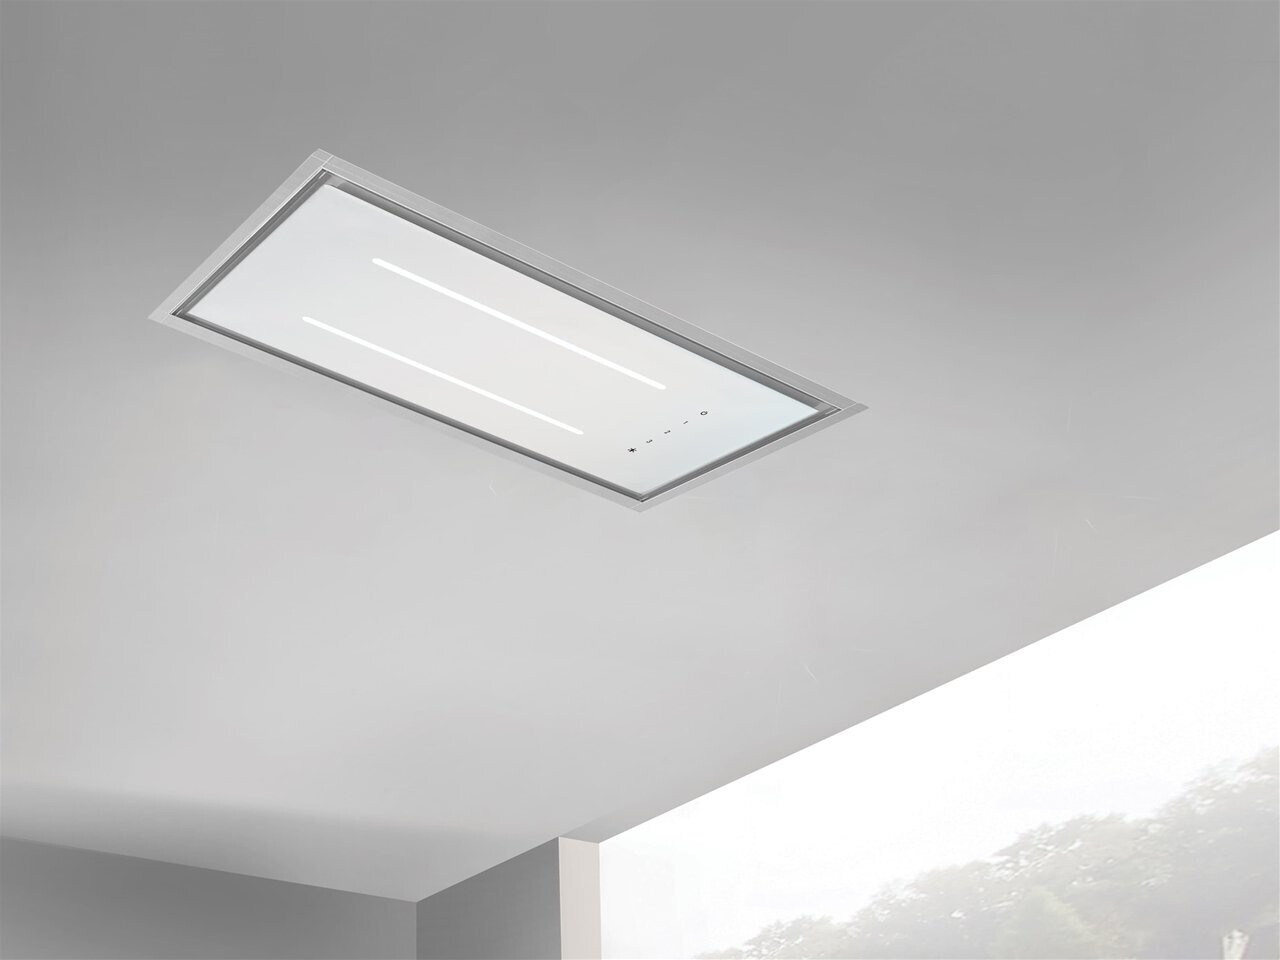 Aria Flush Fit Ceiling Hood 90x30 White & Stainless Steel Fits Between Joists